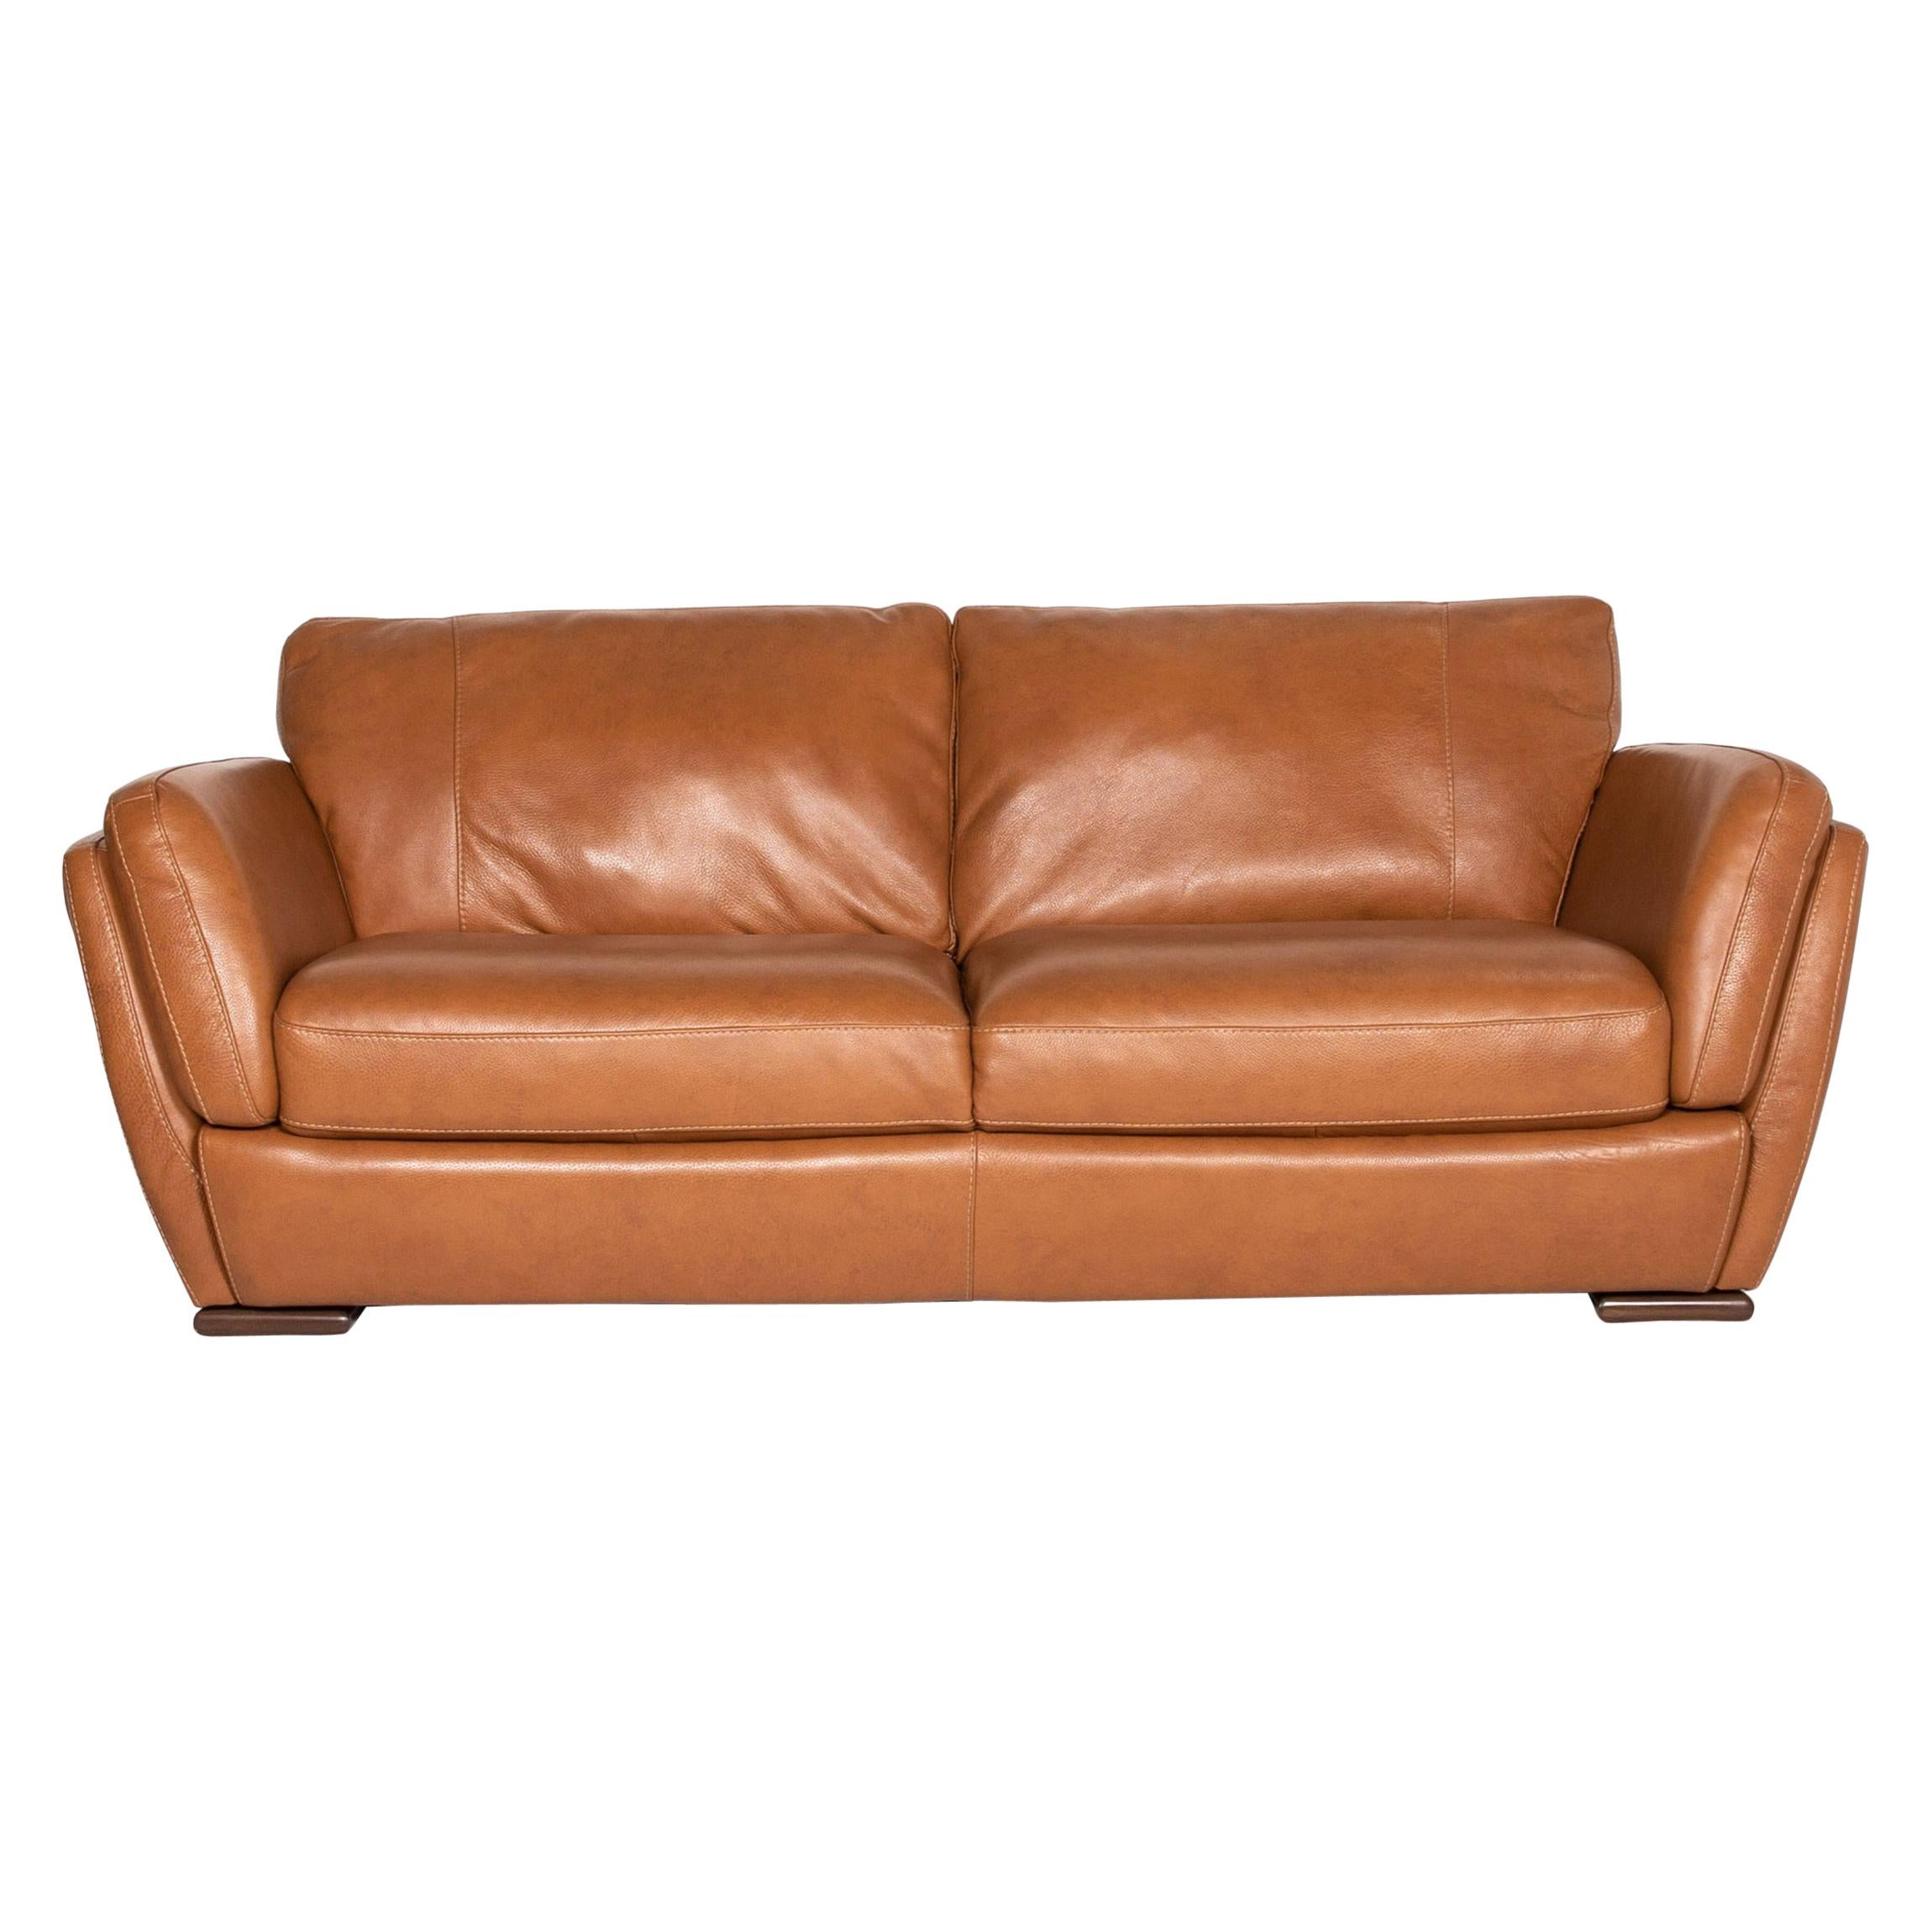 Natuzzi Editions Leather Sofa Cognac Brown Three-Seater Couch at 1stDibs | natuzzi  leather sofa, natuzzi leather couch, leather natuzzi sofa